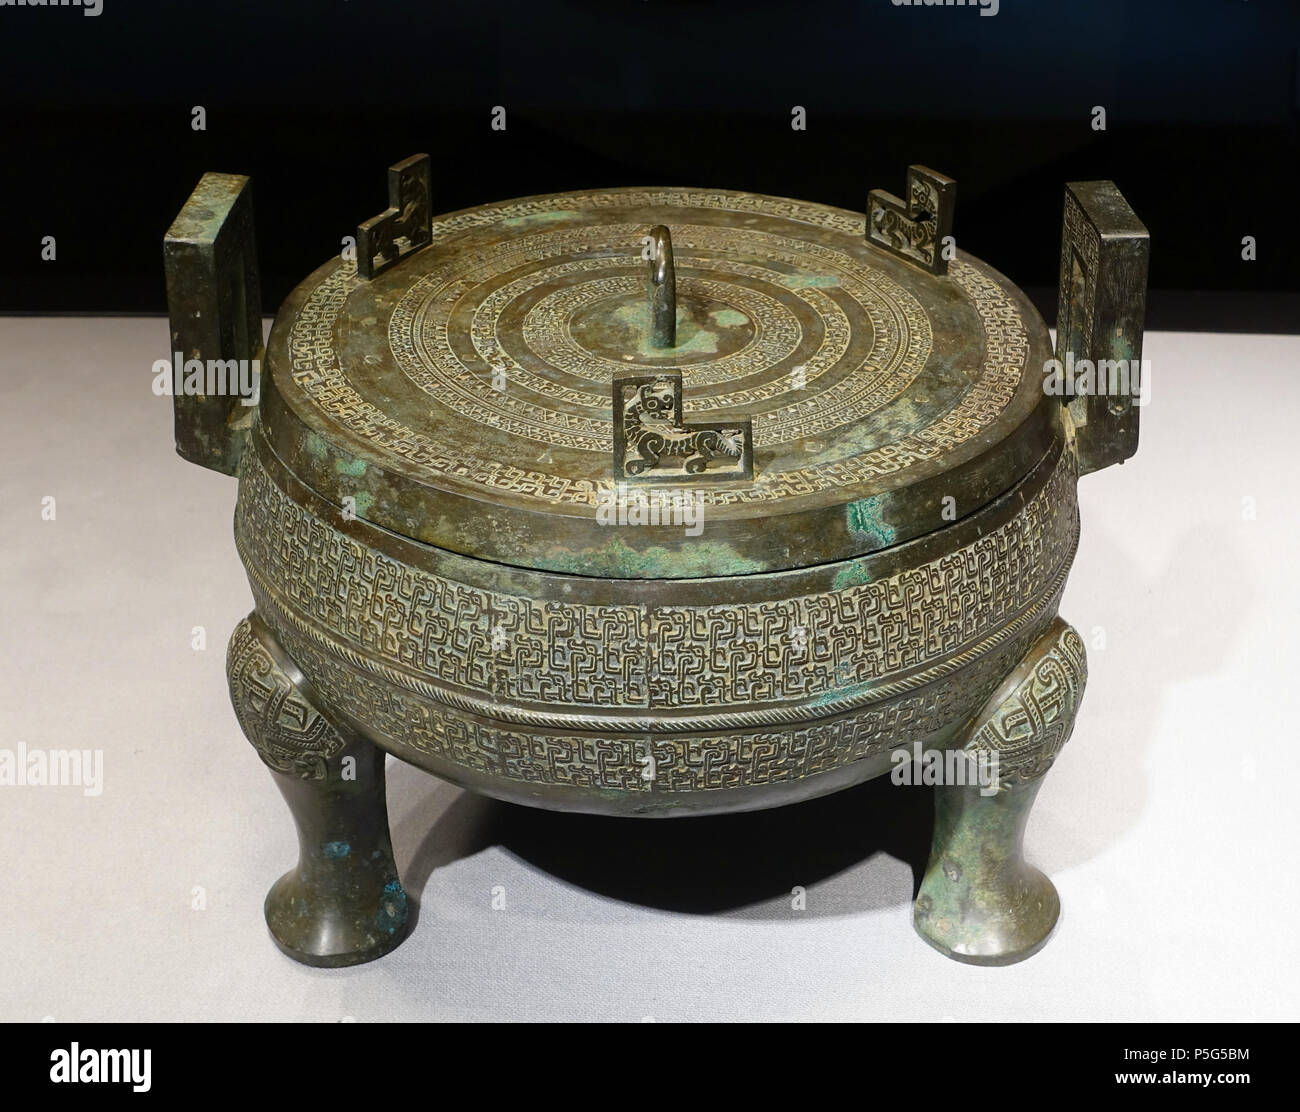 N/A. English: Exhibit in the Tokyo National Museum - Tokyo, Japan. 1 August 2017, 22:04:41. Daderot 455 Ding cooking vessel with coiling dragon design, China, Spring and Autumn period, 7th-6th century BC, bronze - Tokyo National Museum - Tokyo, Japan - DSC08454 Stock Photo